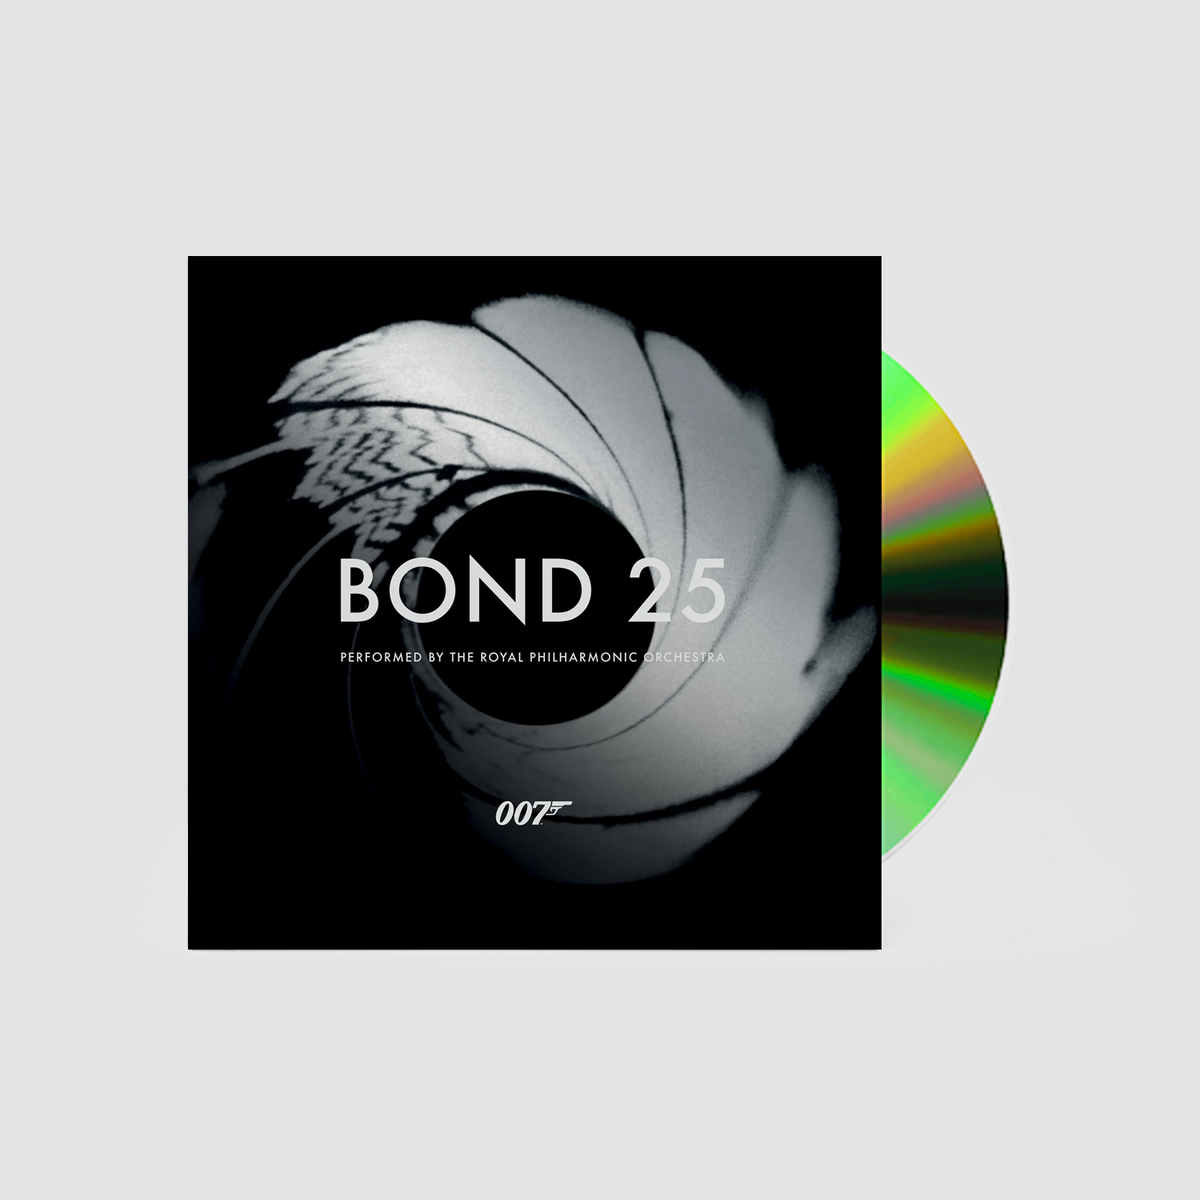 Bond 25 CD - Performed By The Royal Philharmonic Orchestra